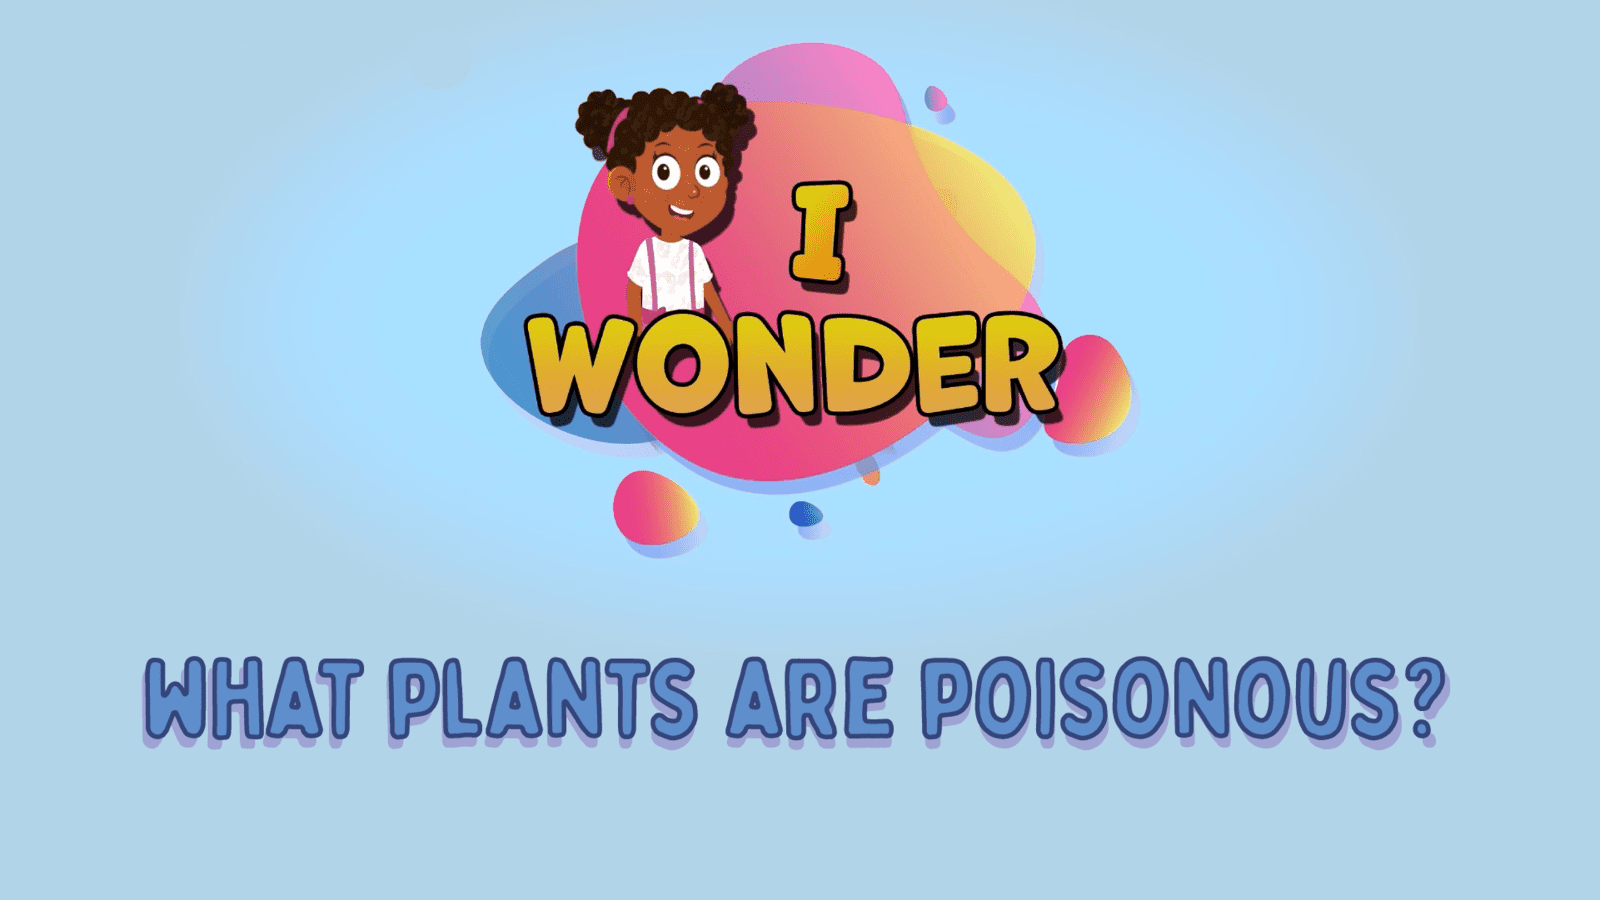 What Plants Are Poisonous?